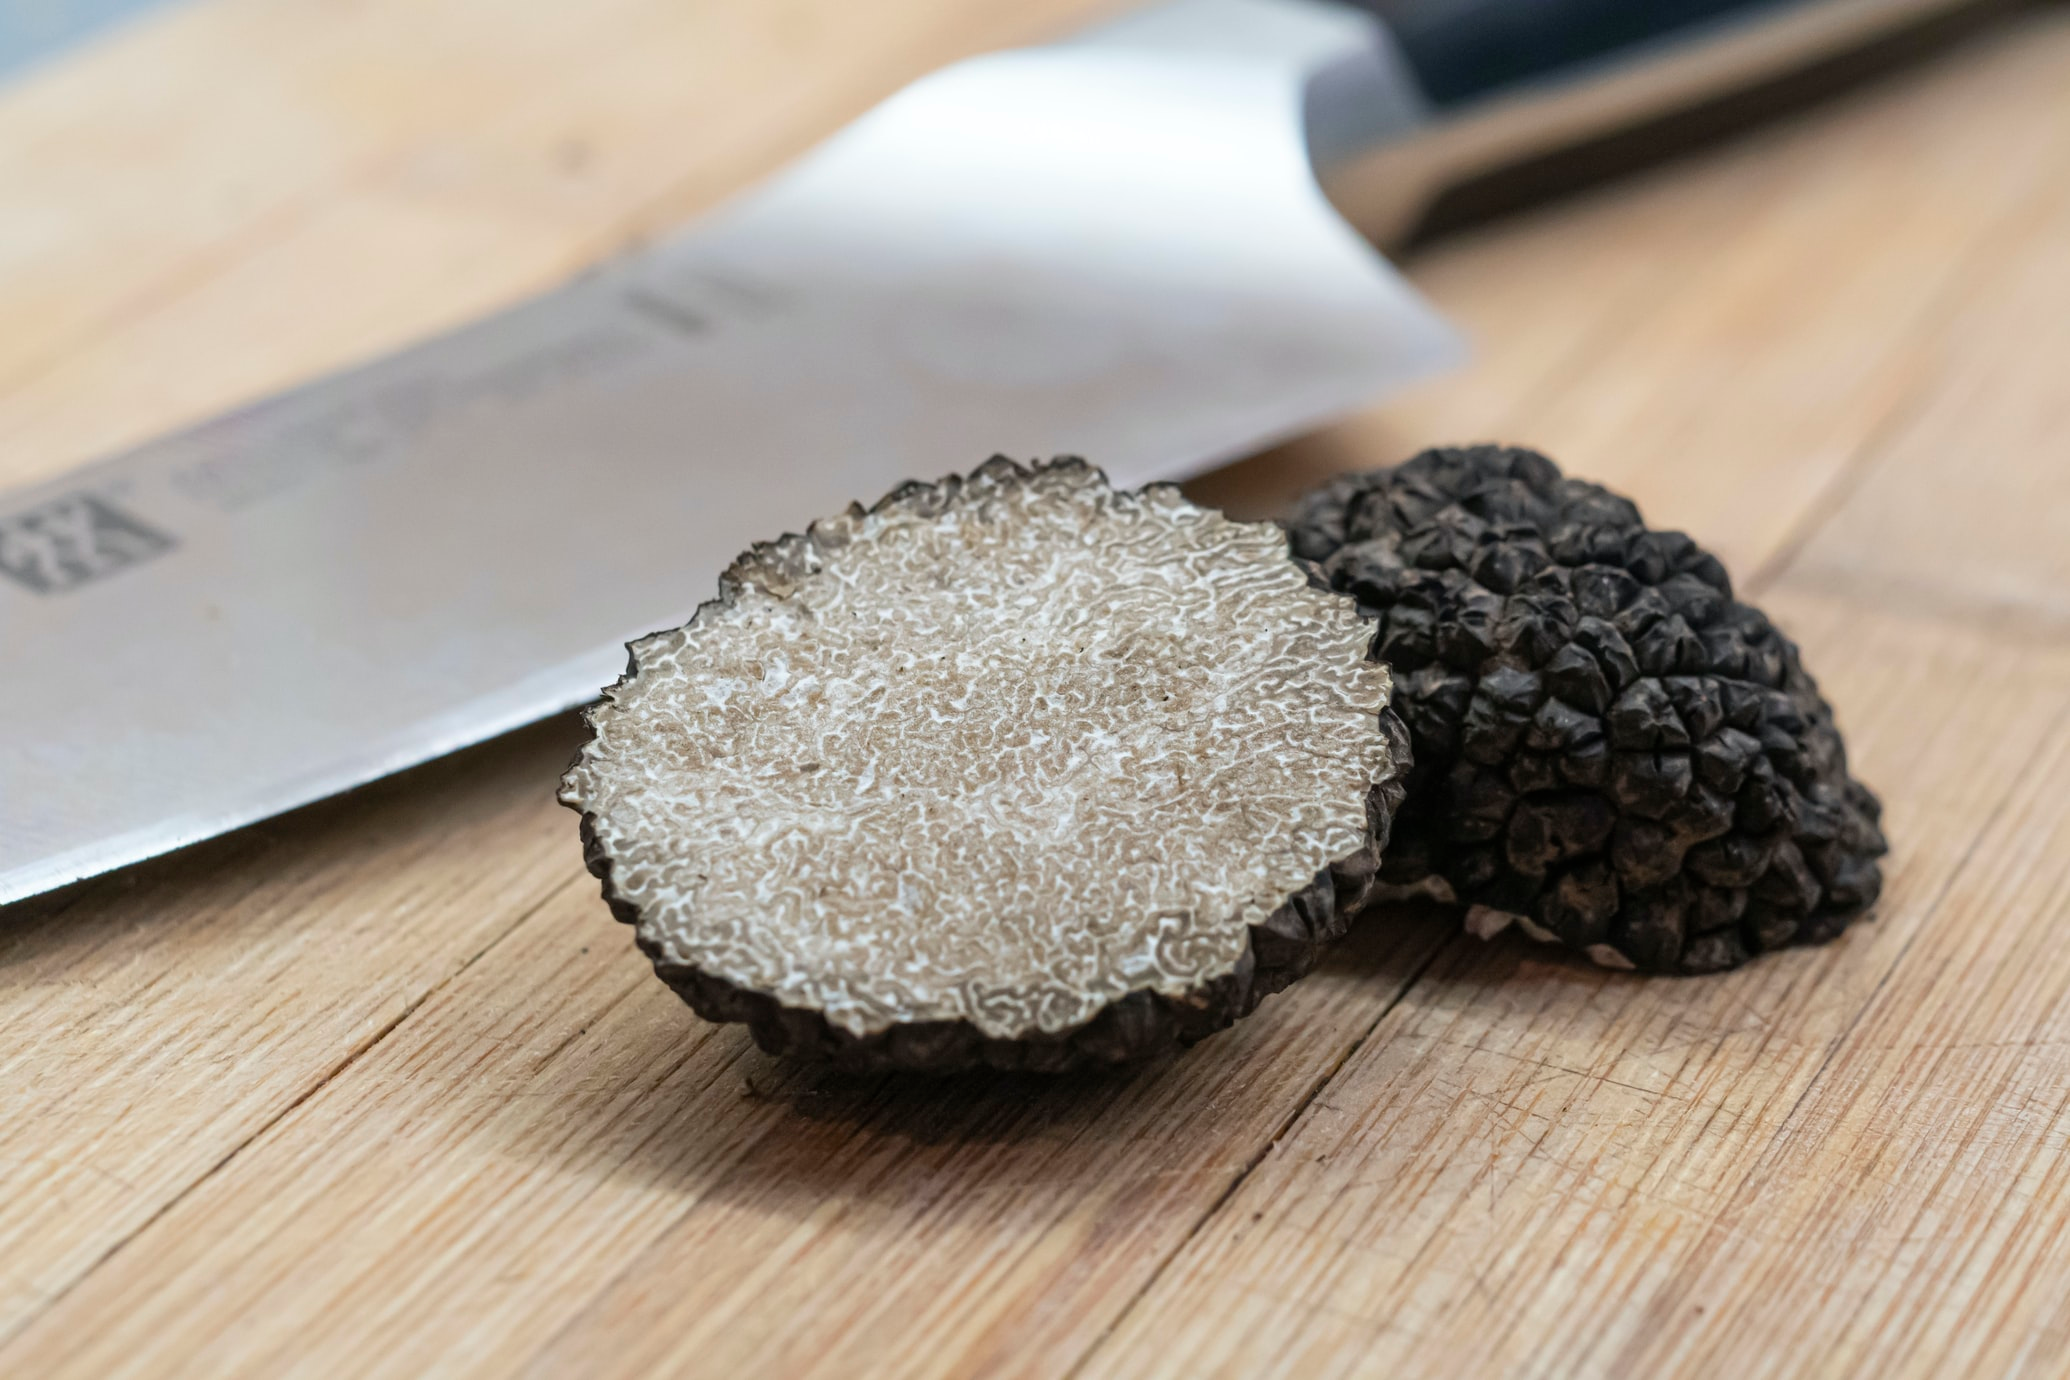 Why are truffles so darned expensive?